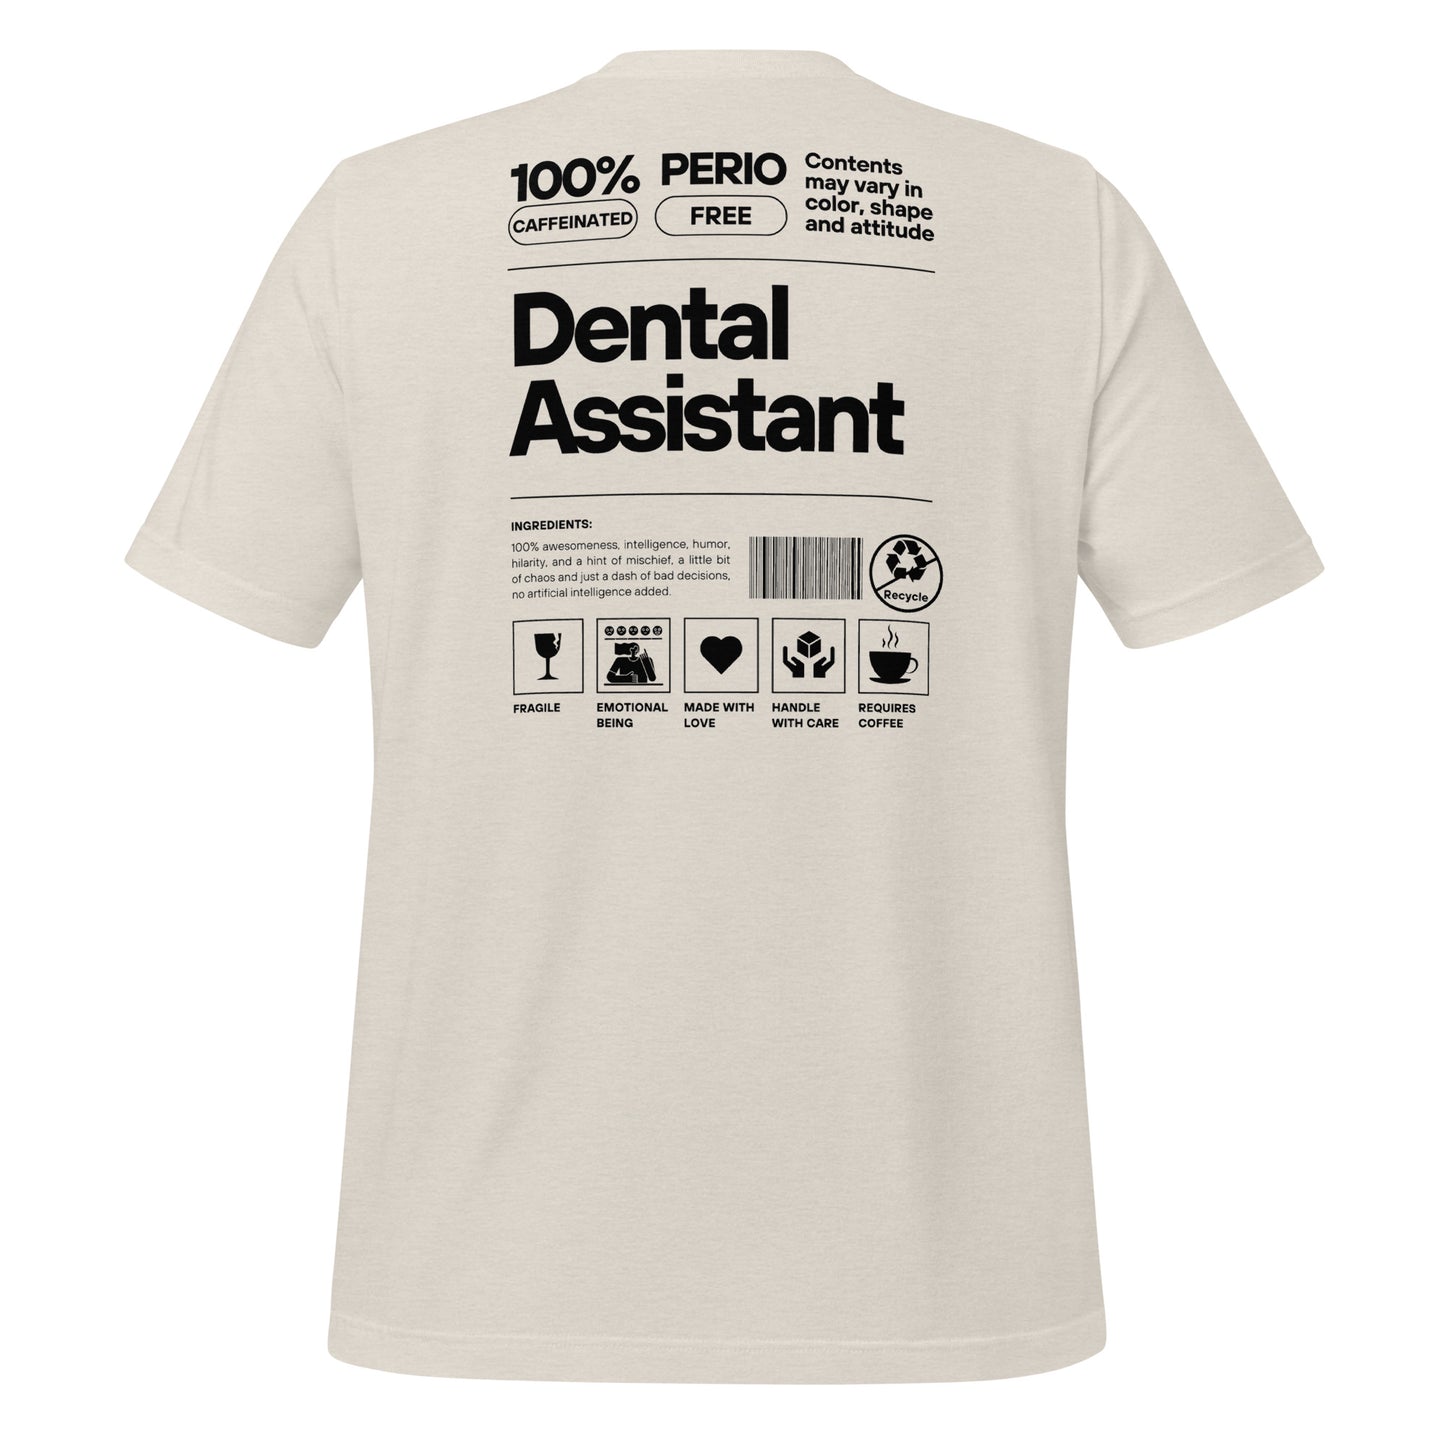 Heather dust dental assistant shirt featuring a creative label design with icons and text, perfect for dental assistants who want to express their identity and passion for their job - dental shirts back view.